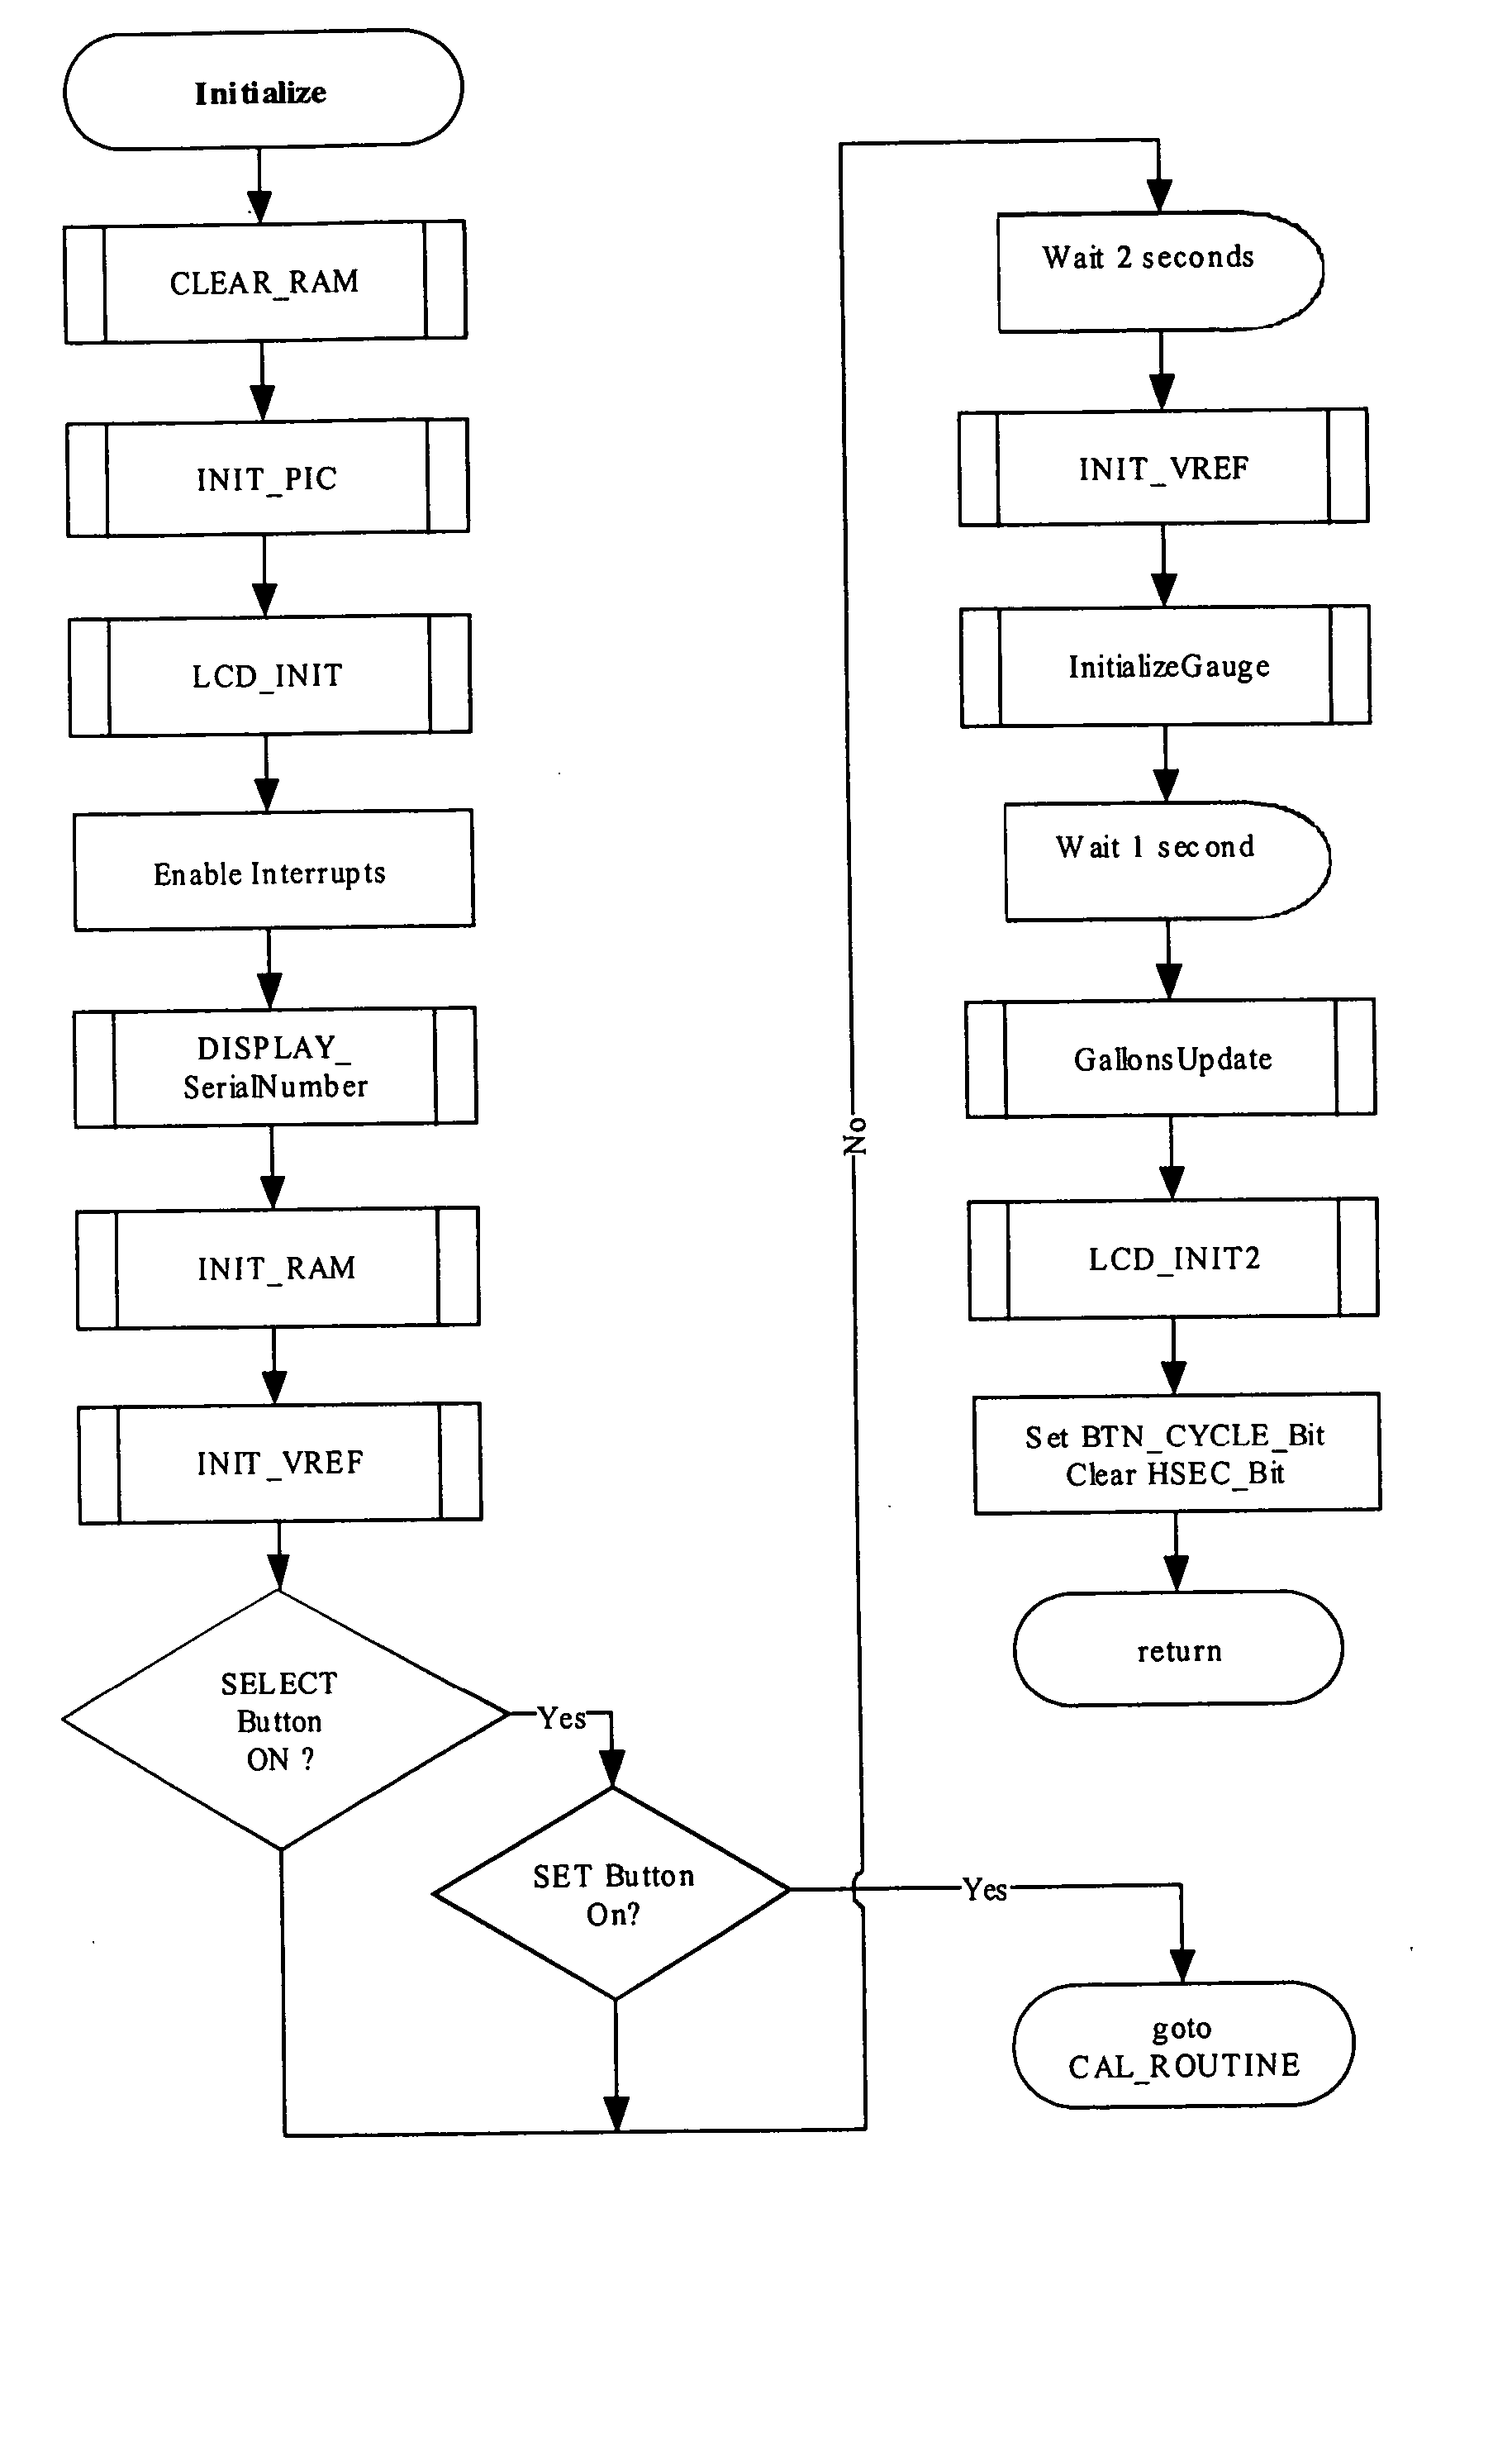 Computer-controlled auxiliary fuel tank system with multi-function monitoring system and user calibration capabilities